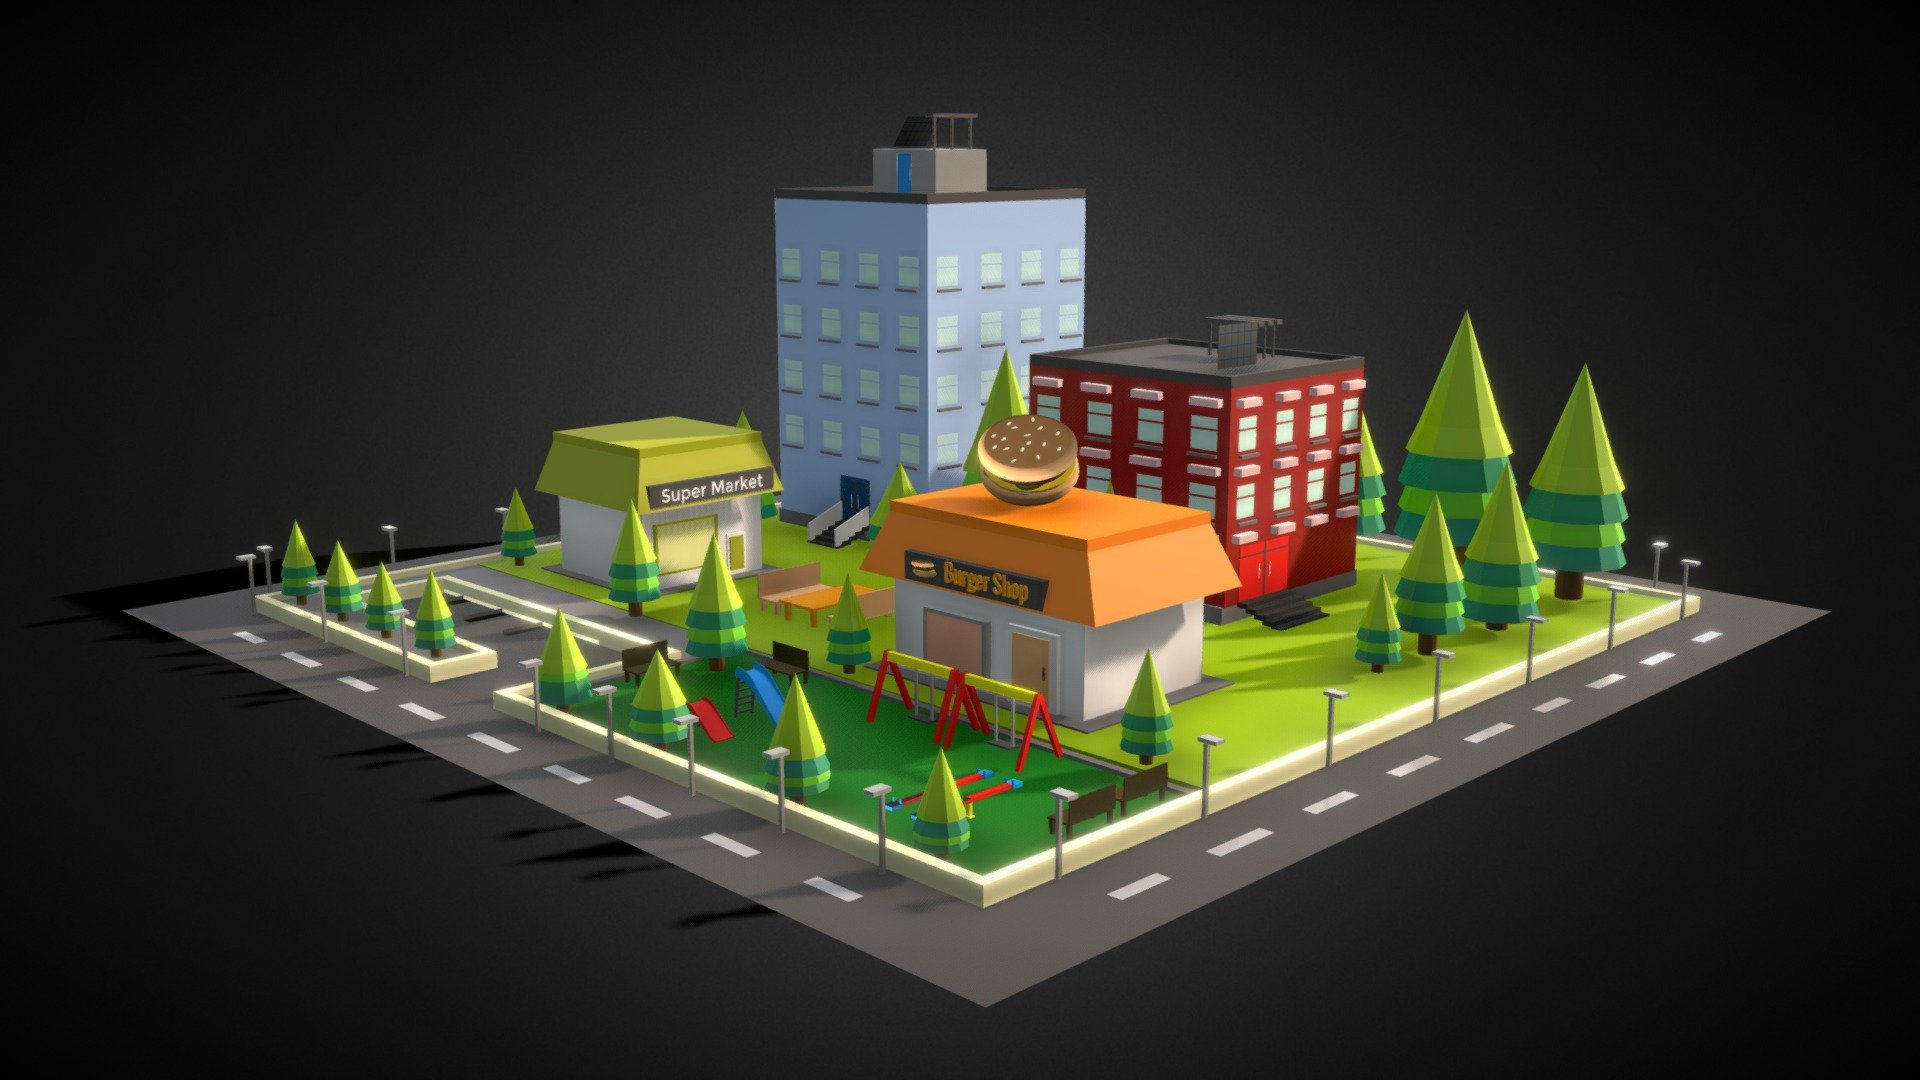 Little Low Poly City 3D By Mowahed 3D

This Item Includes
1.Roads
2.City Lights
3.Buildings
4.Shops
5.Park
6.Car Parking And Much More - Little Low Poly City 3D - Buy Royalty Free 3D model by Mowahed 3D (@mowahedrehan) 3d model